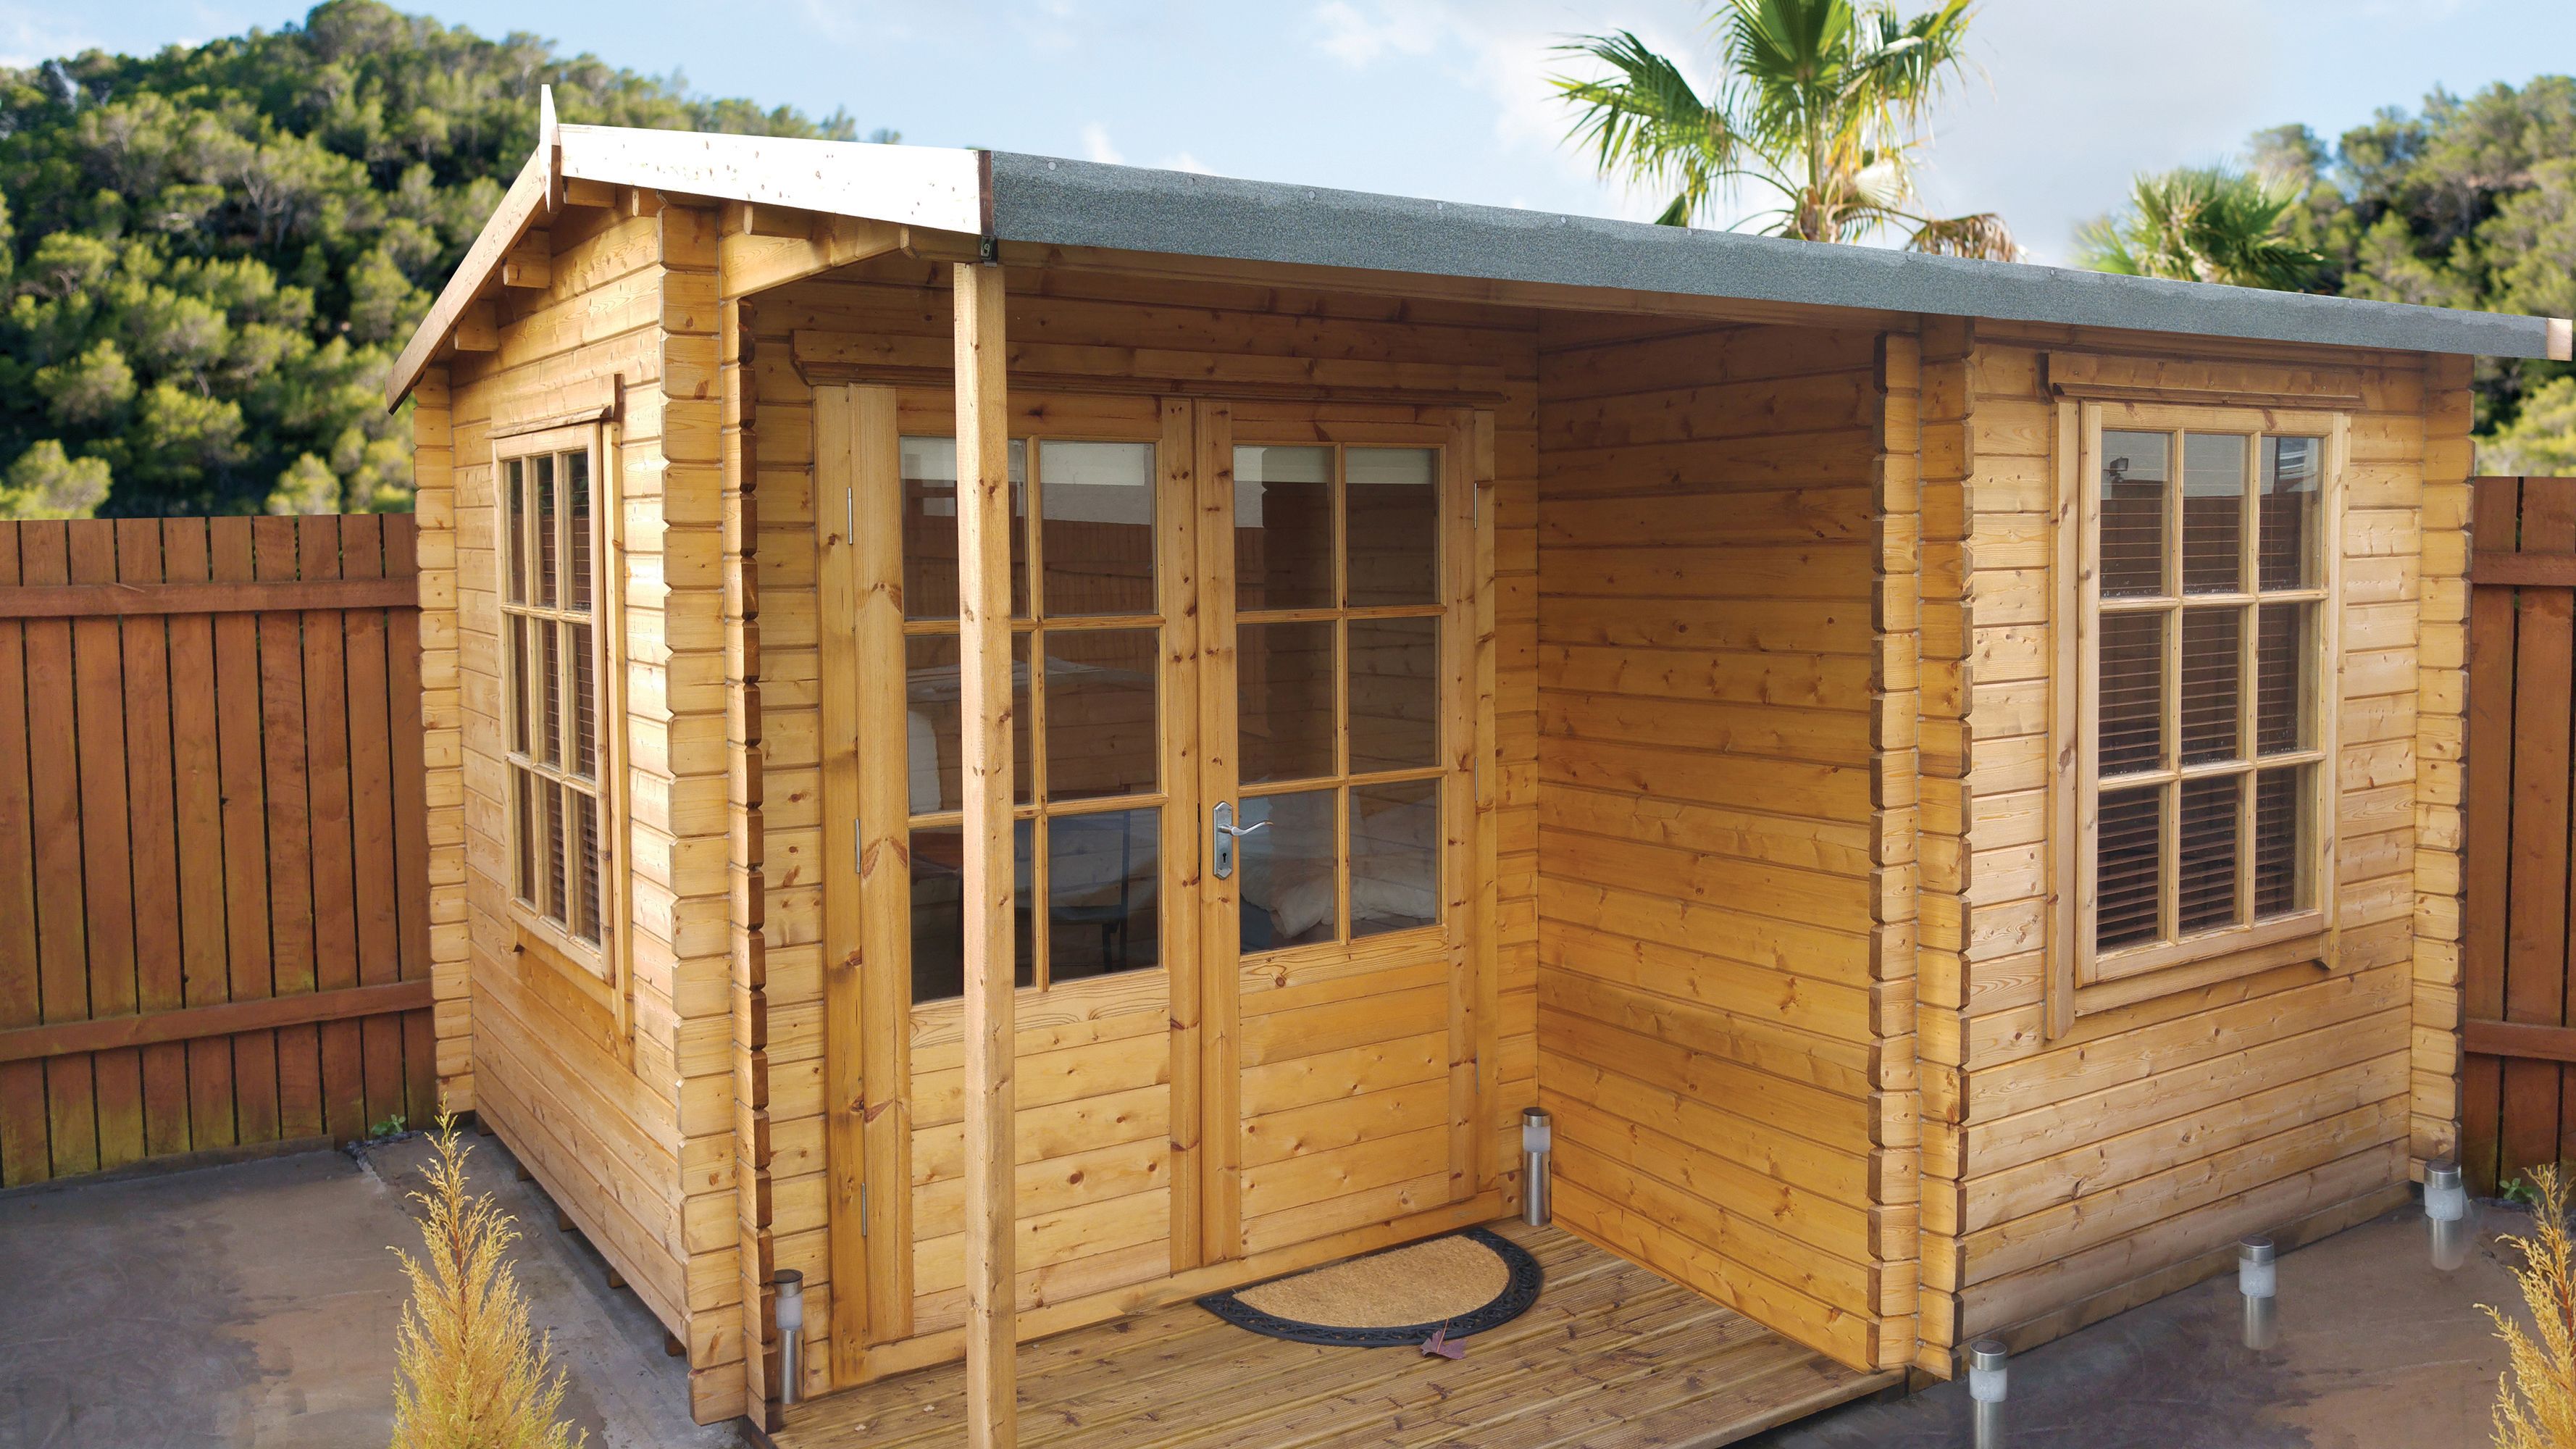 Image of Shire Ringwood 12 x 13ft Double Door Log Cabin including Covered Porch